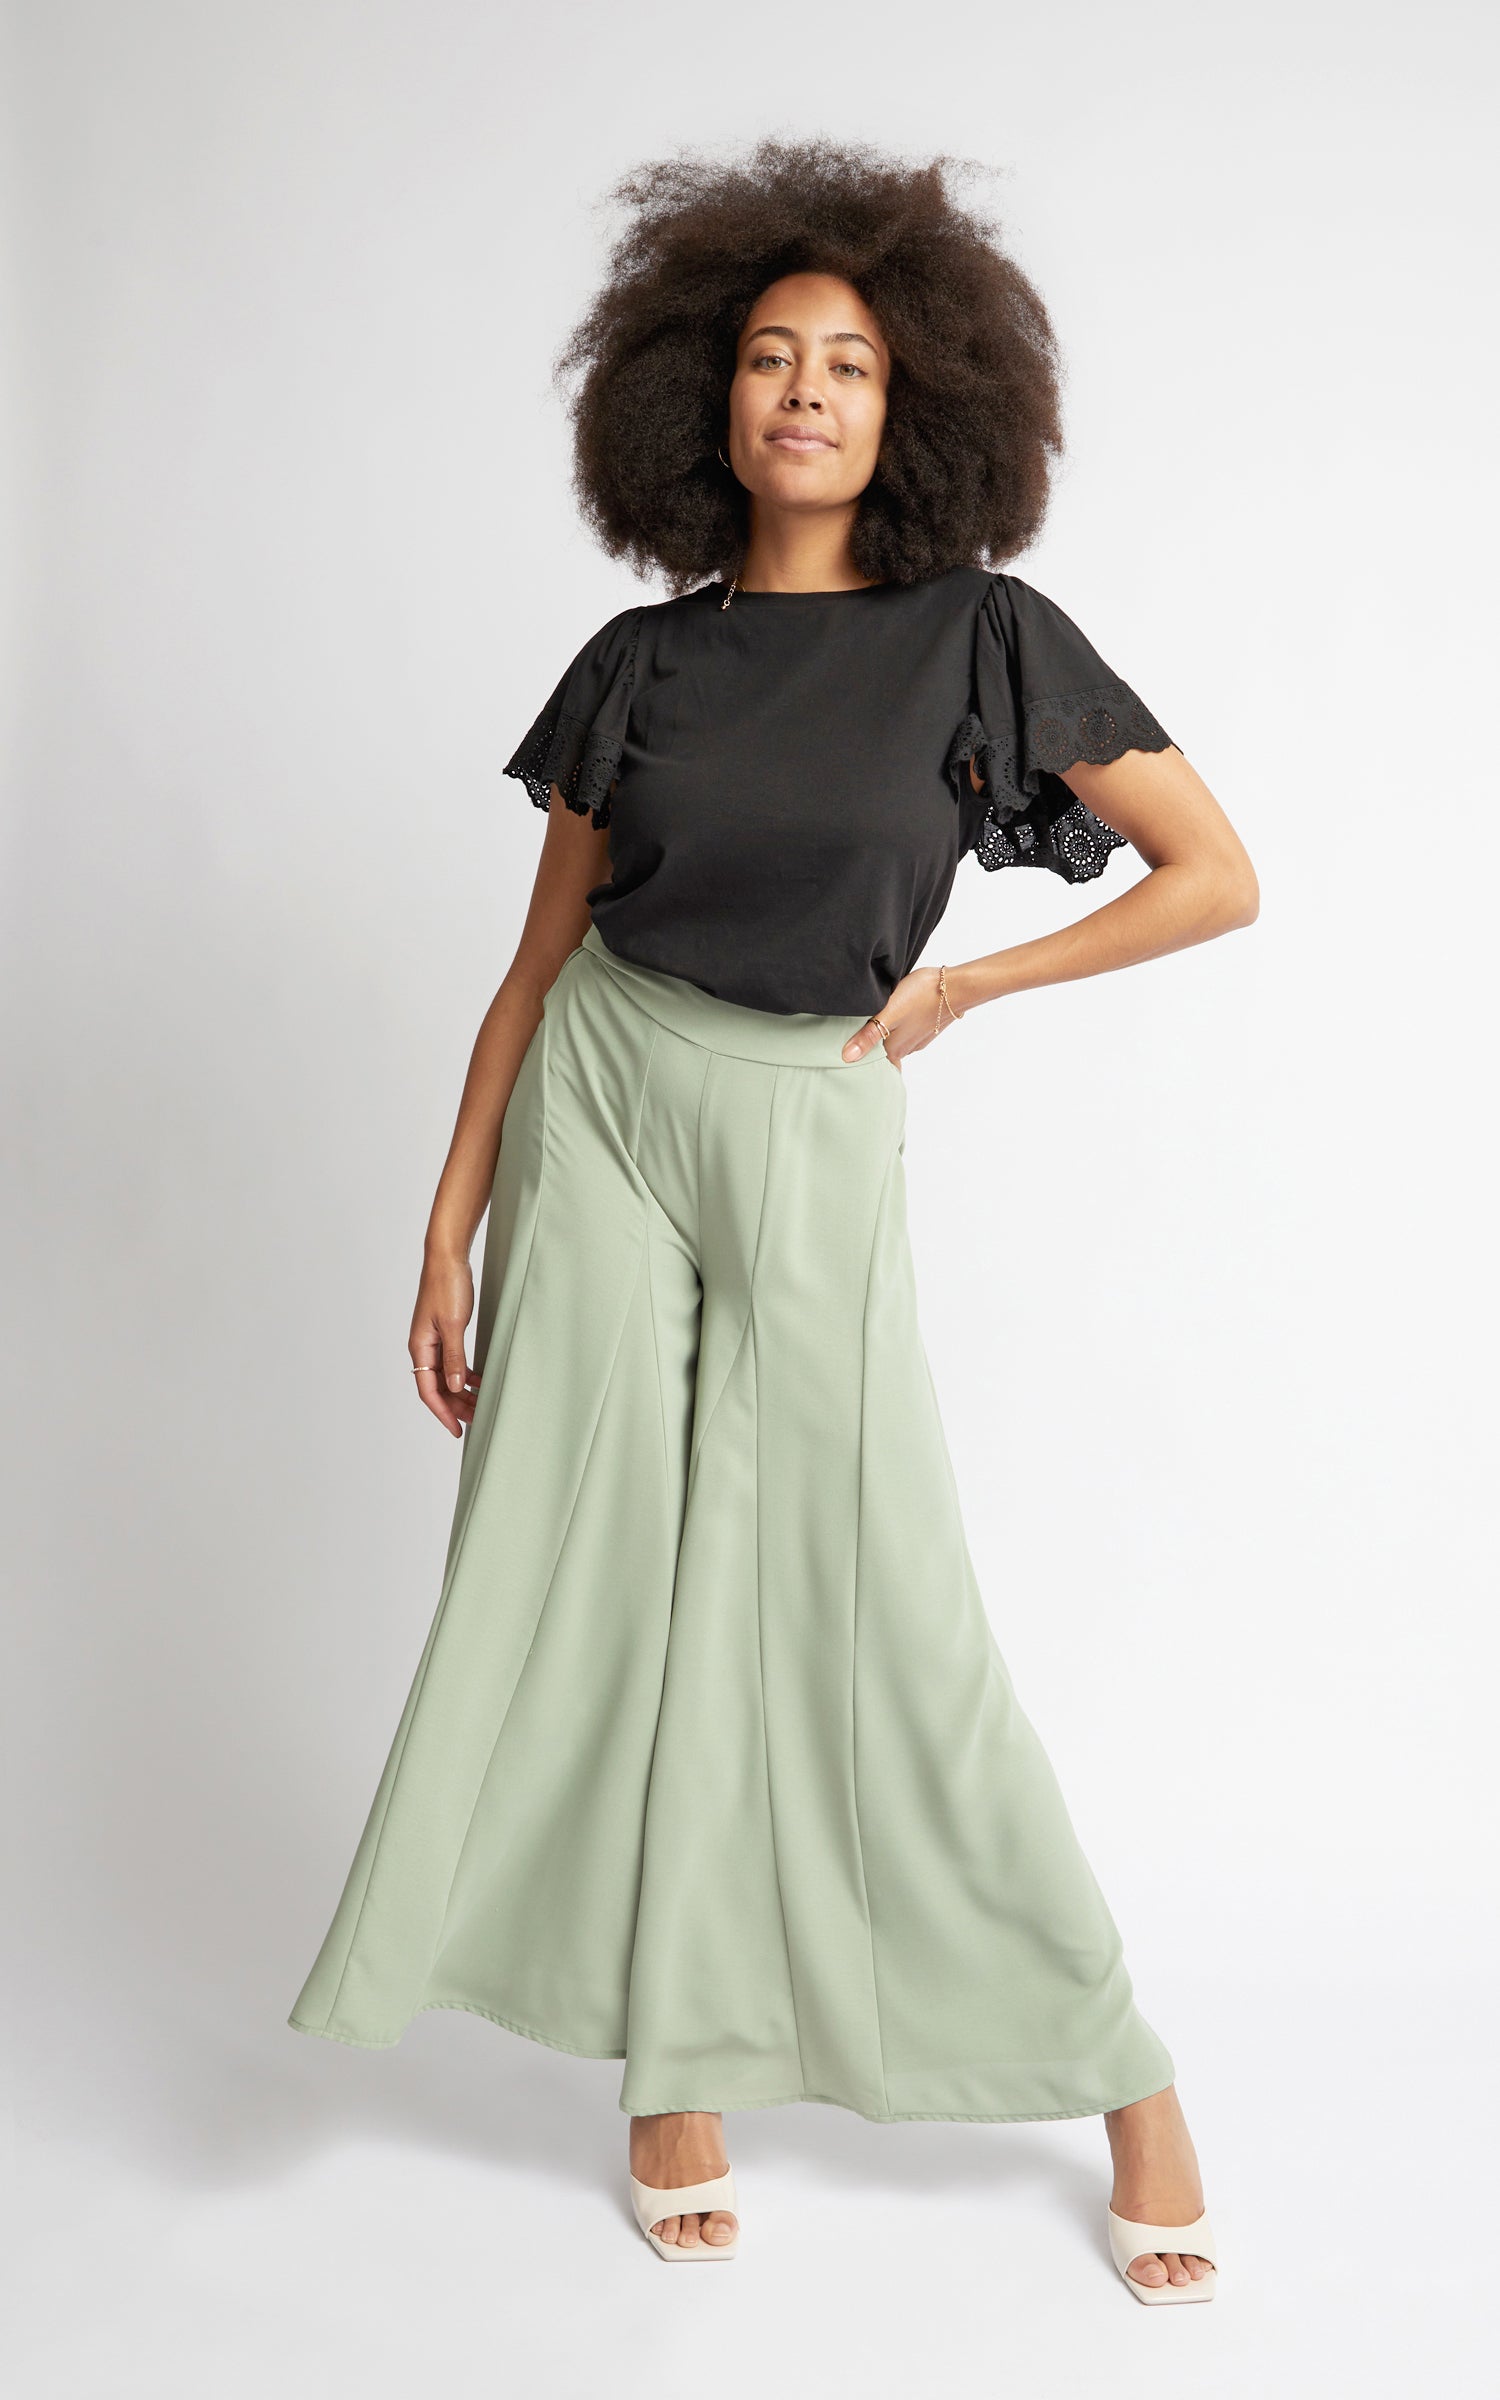 Palazzo Pants For Women: Buy Women Palazzo Online in India - Style Union